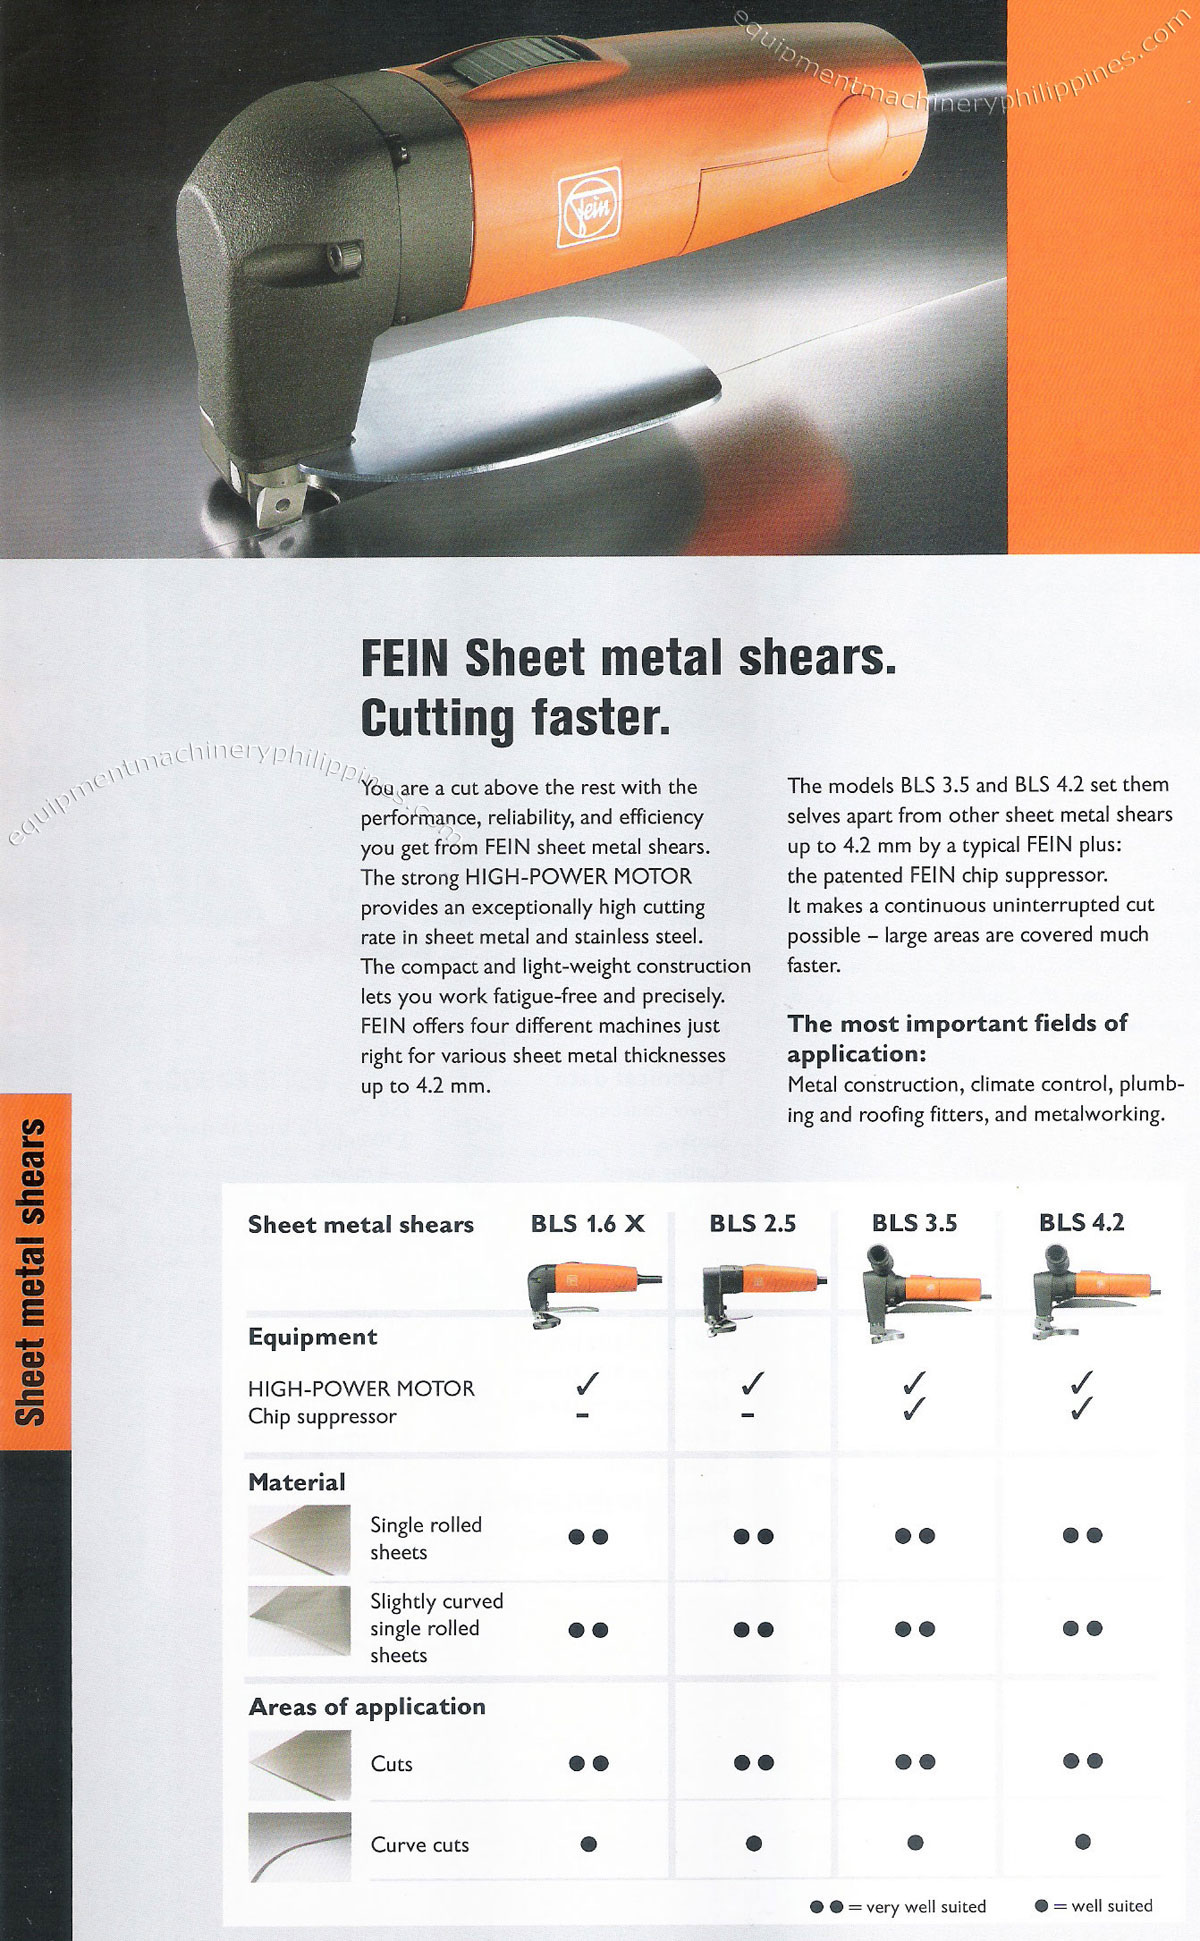 High Cutting Rate in Sheet Metal and Stainless Steel